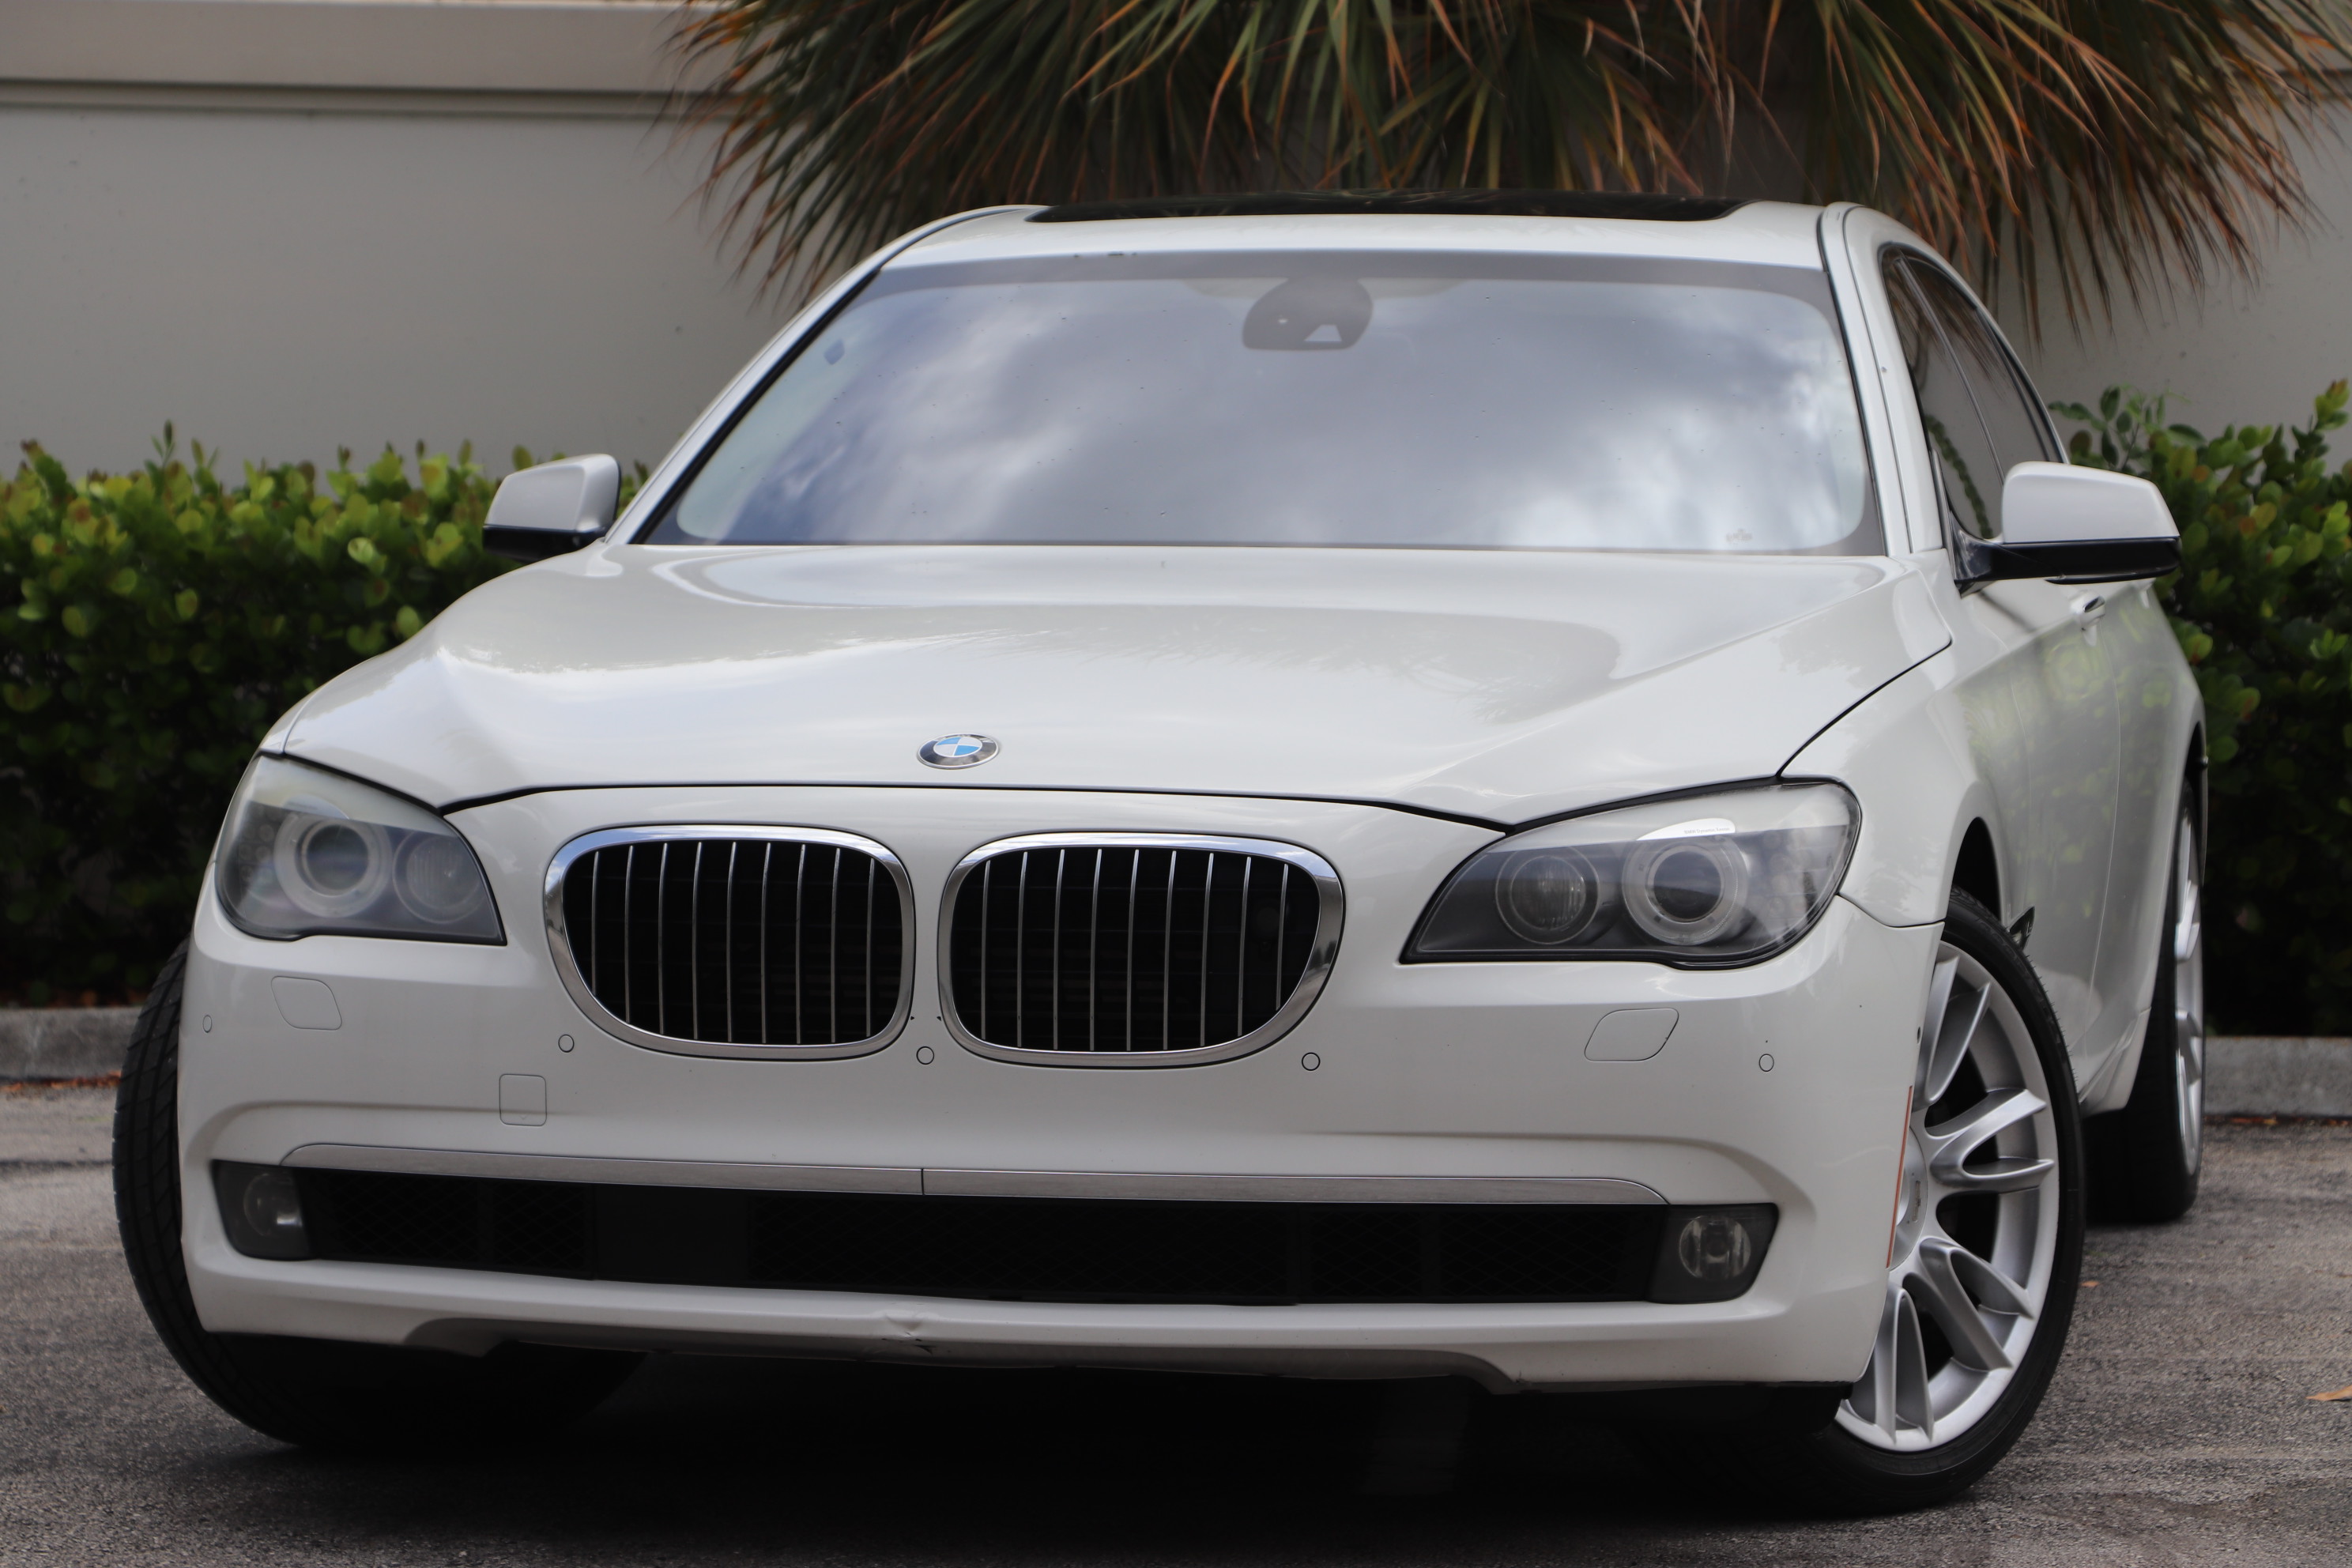 Buy Used 2011 BMW 760LI V12 INDIVIDUAL for $19 900 from trusted dealer in  Brooklyn, NY!